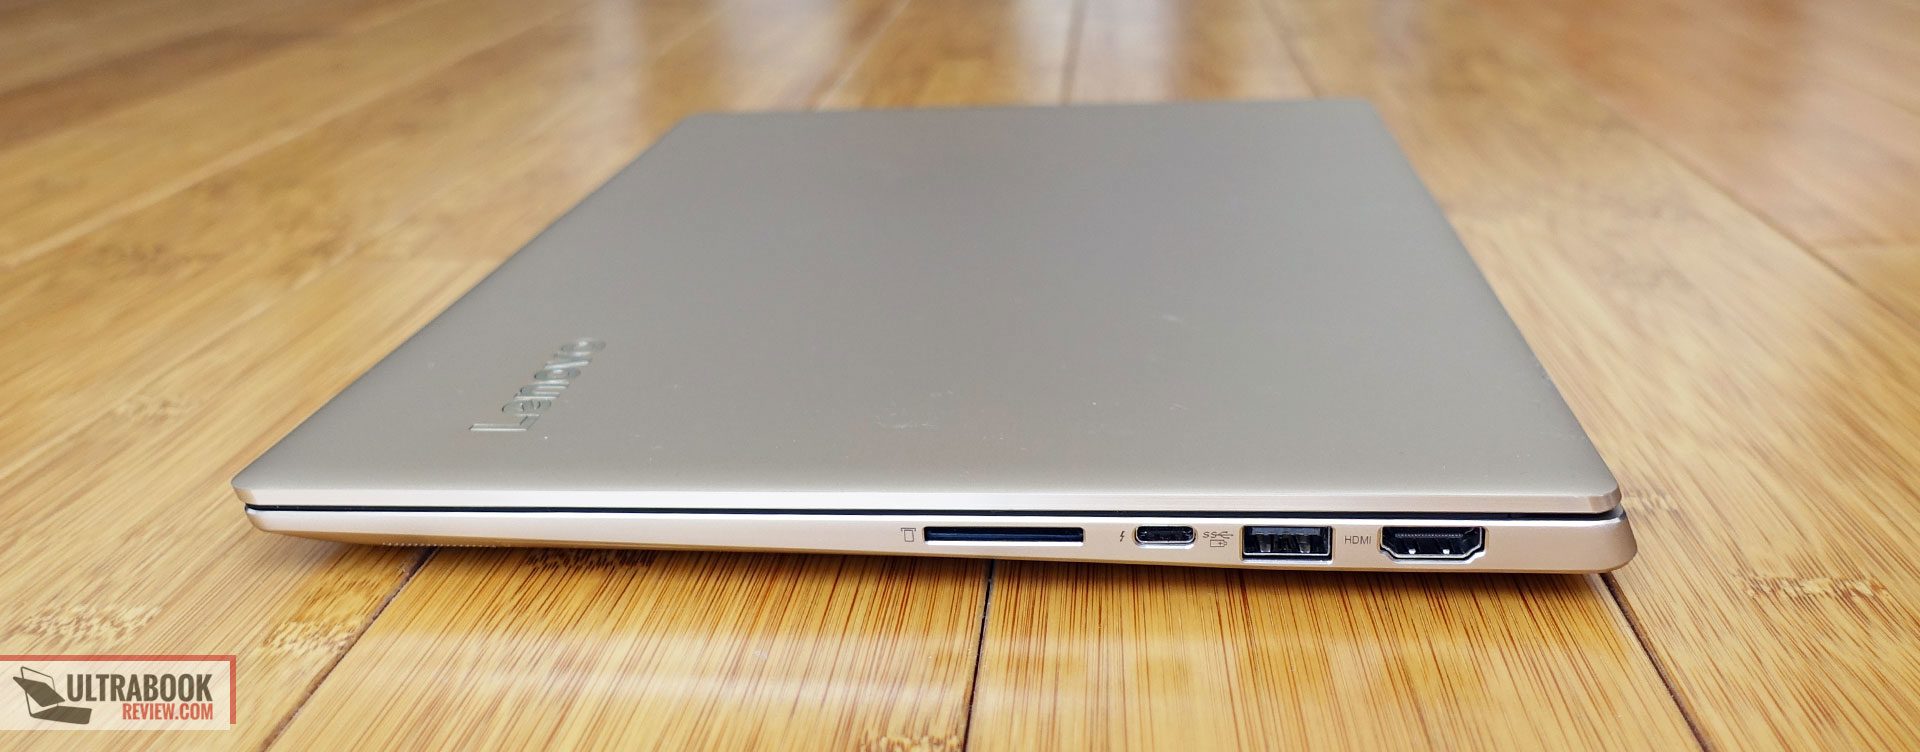 Lenovo IdeaPad 720s review - a solid all-round thin-and-light laptop